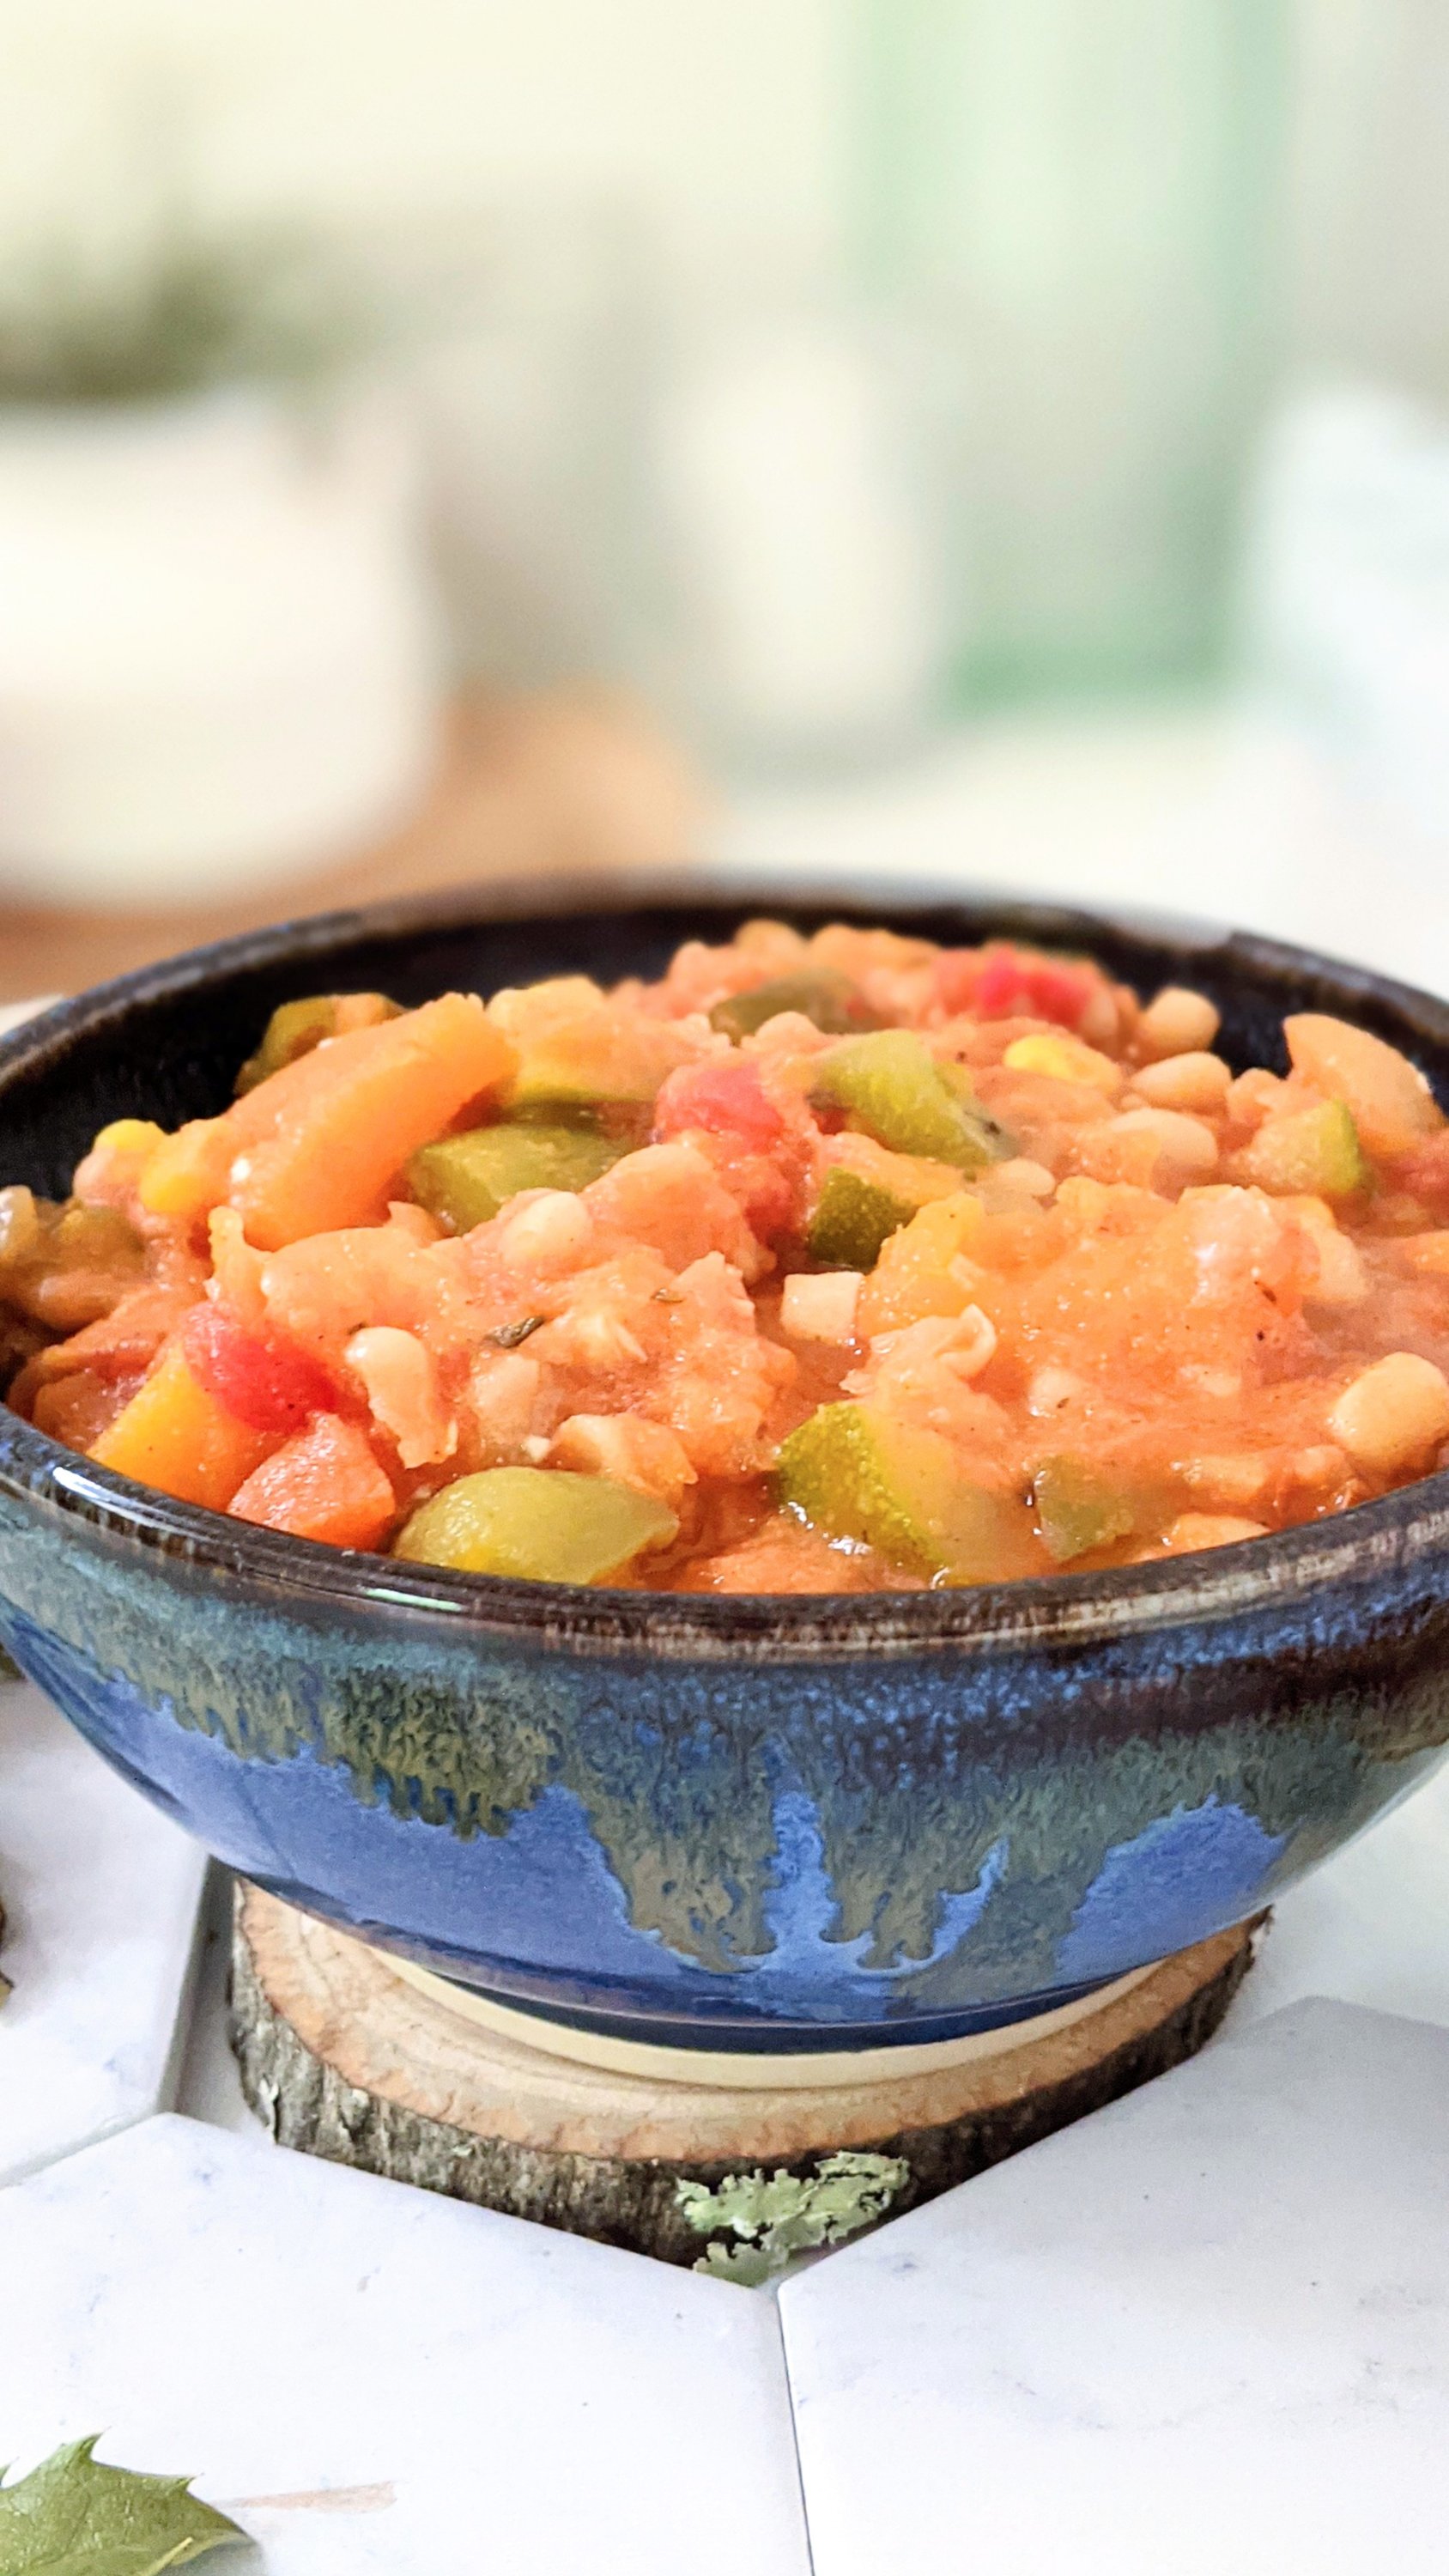 vegan summer squash stew recipe with corn and beans dinner recipes plant based three sisters stew recipe for summer gardens in northeast or midwest recipes for summer produce